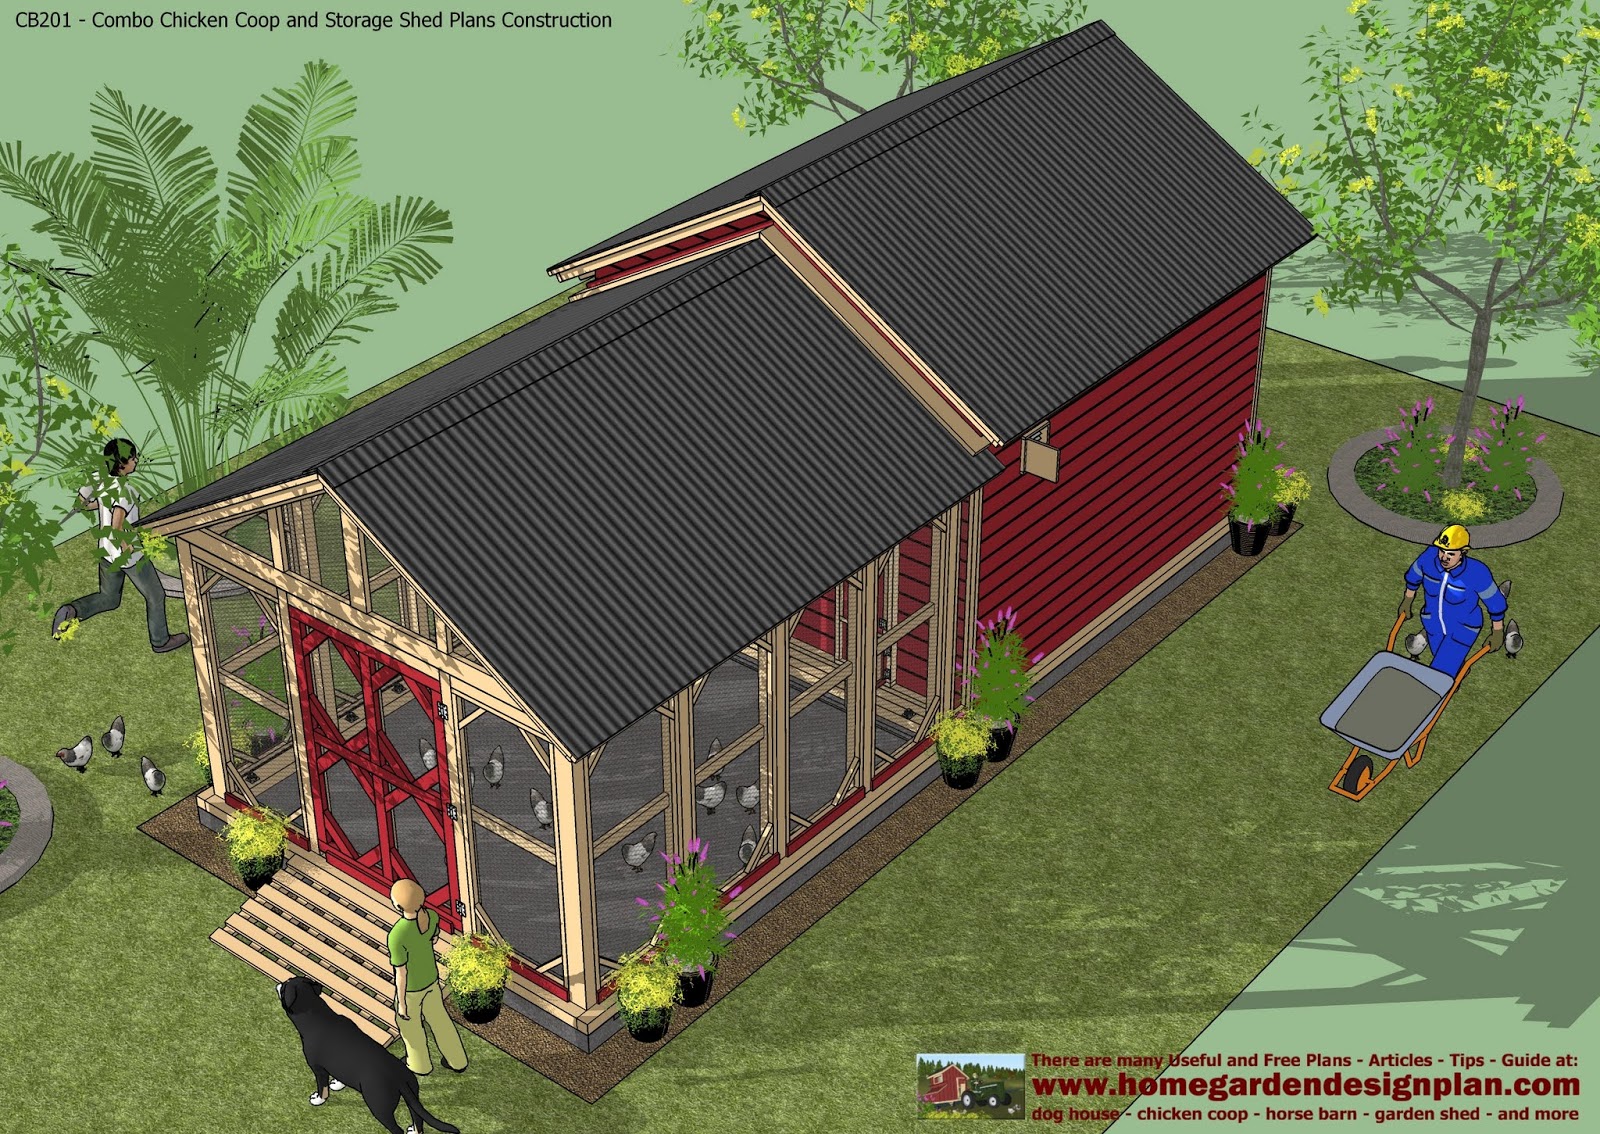 Garden Shed Construction Plans